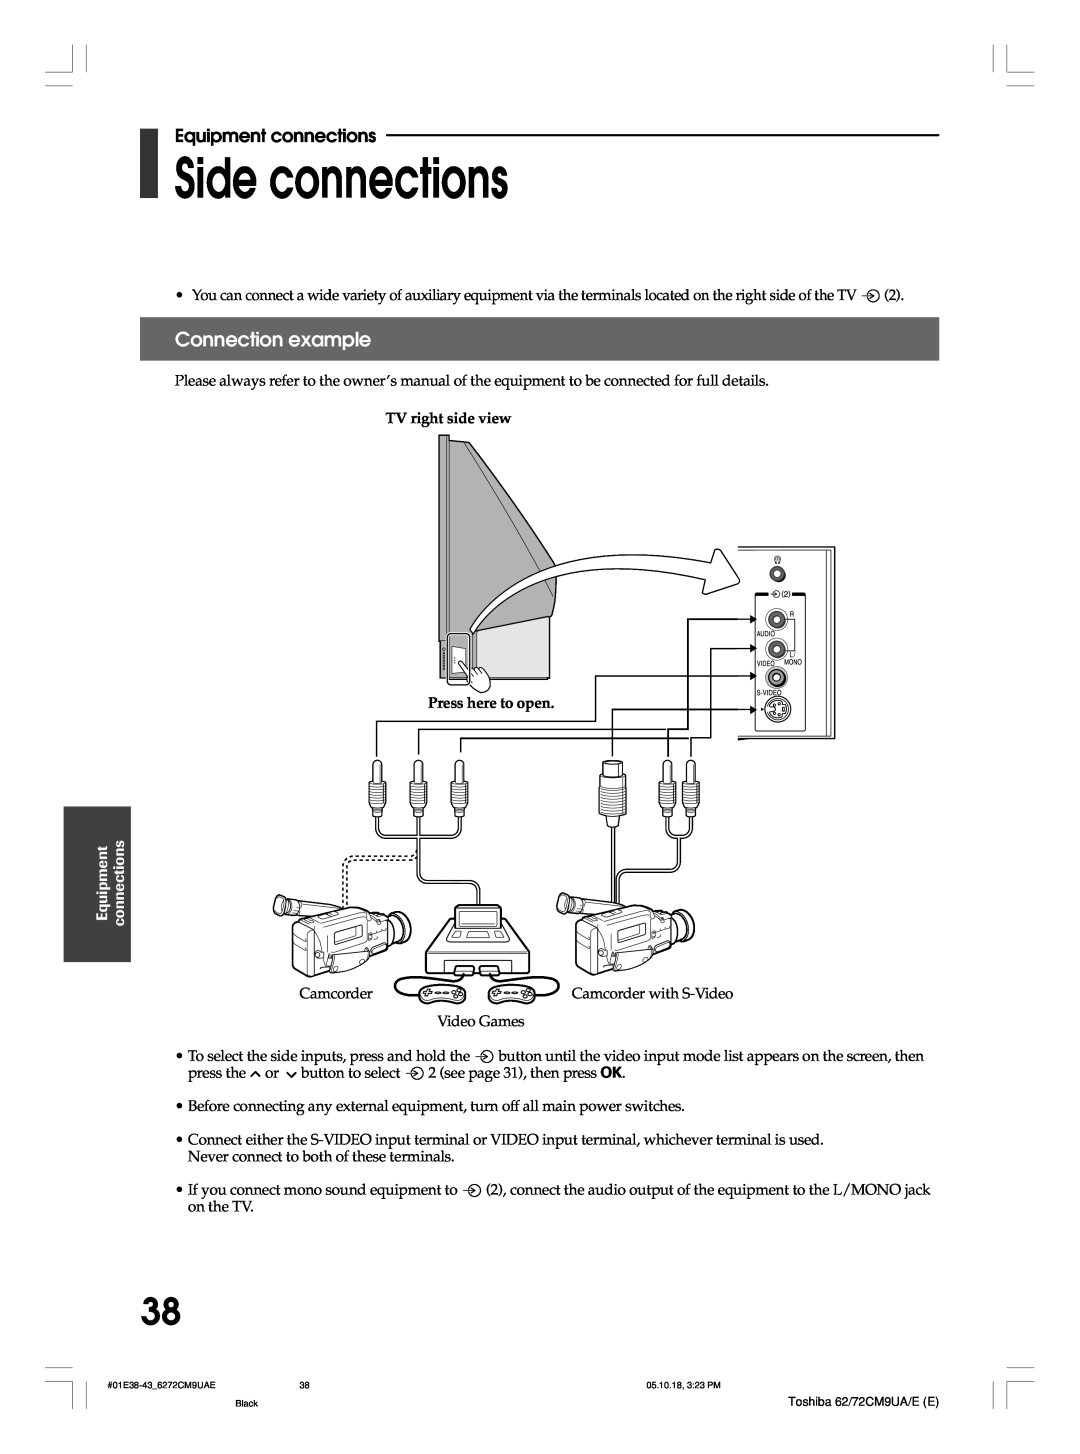 Toshiba 62CM9UE, 62CM9UA, 72CM9UE, 72CM9UA owner manual Side connections, Connection example, Equipment connections 